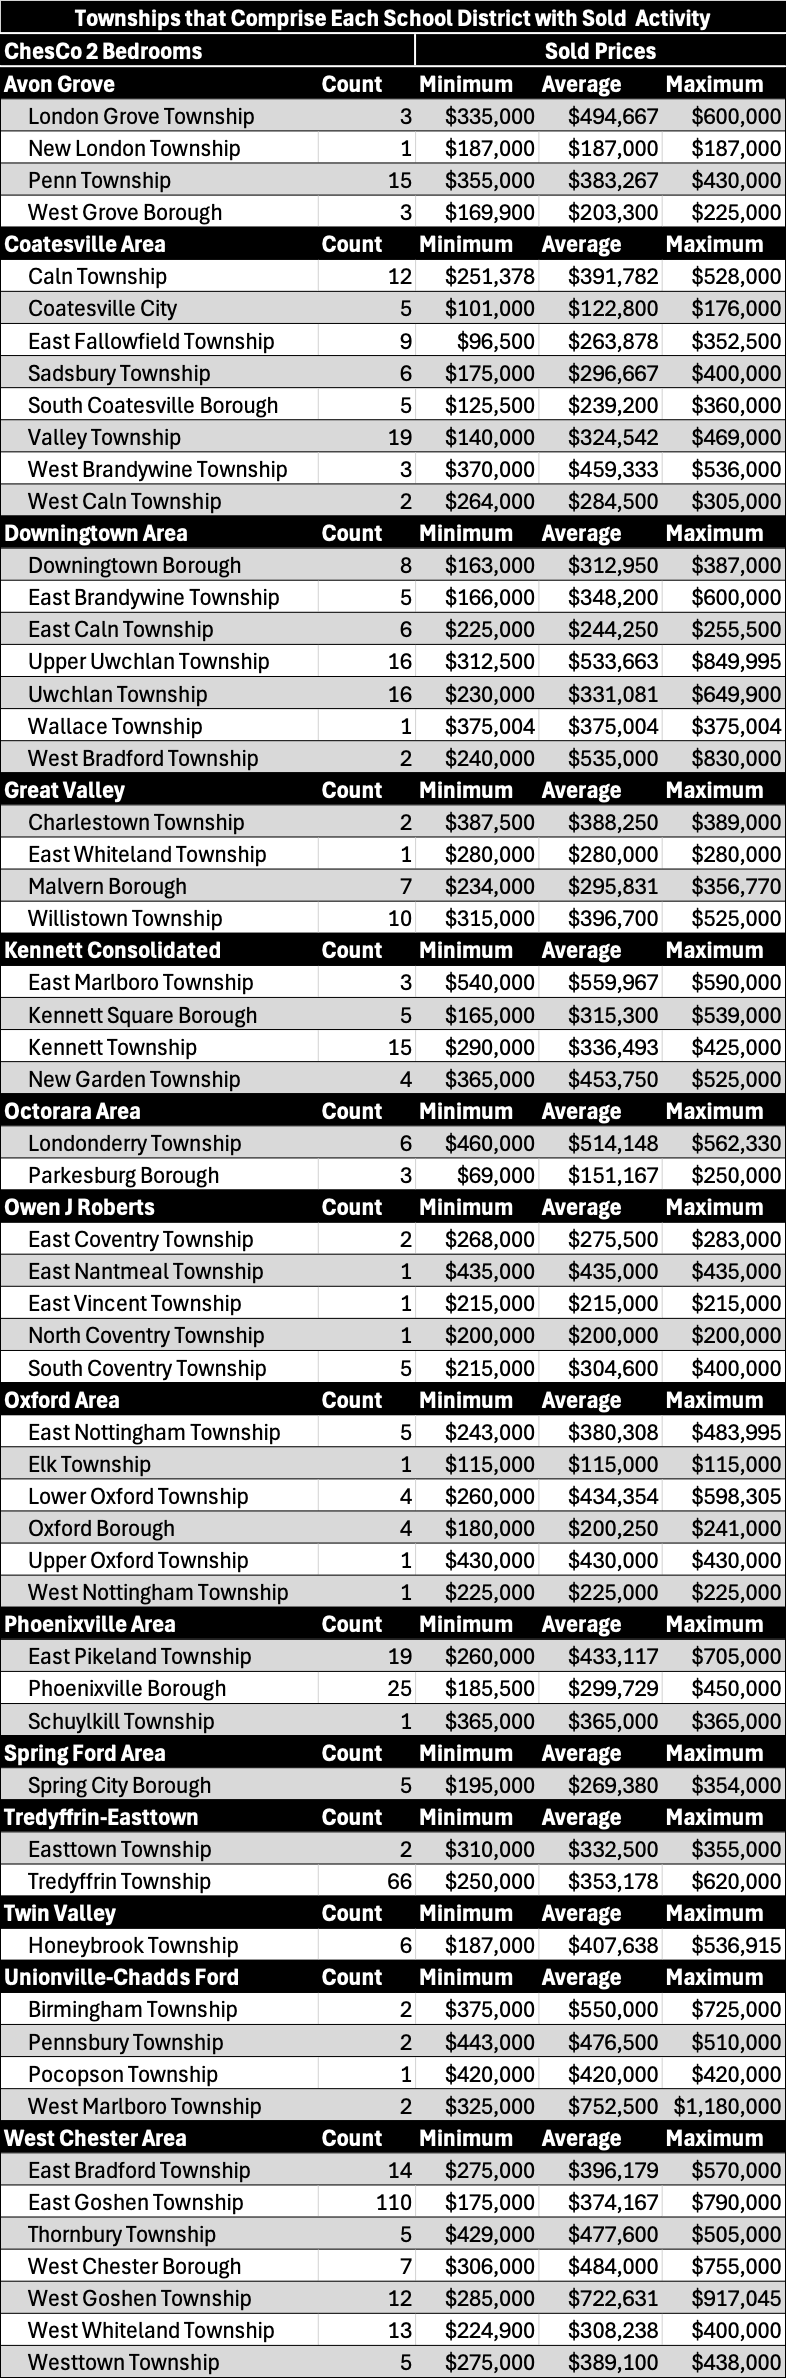 A table of each township within each School District in Chester County, PA for studios and 2 bedrooms, which includes the number of transactions and each township's corresponding sold prices displayed as minimum, average and maximum. 